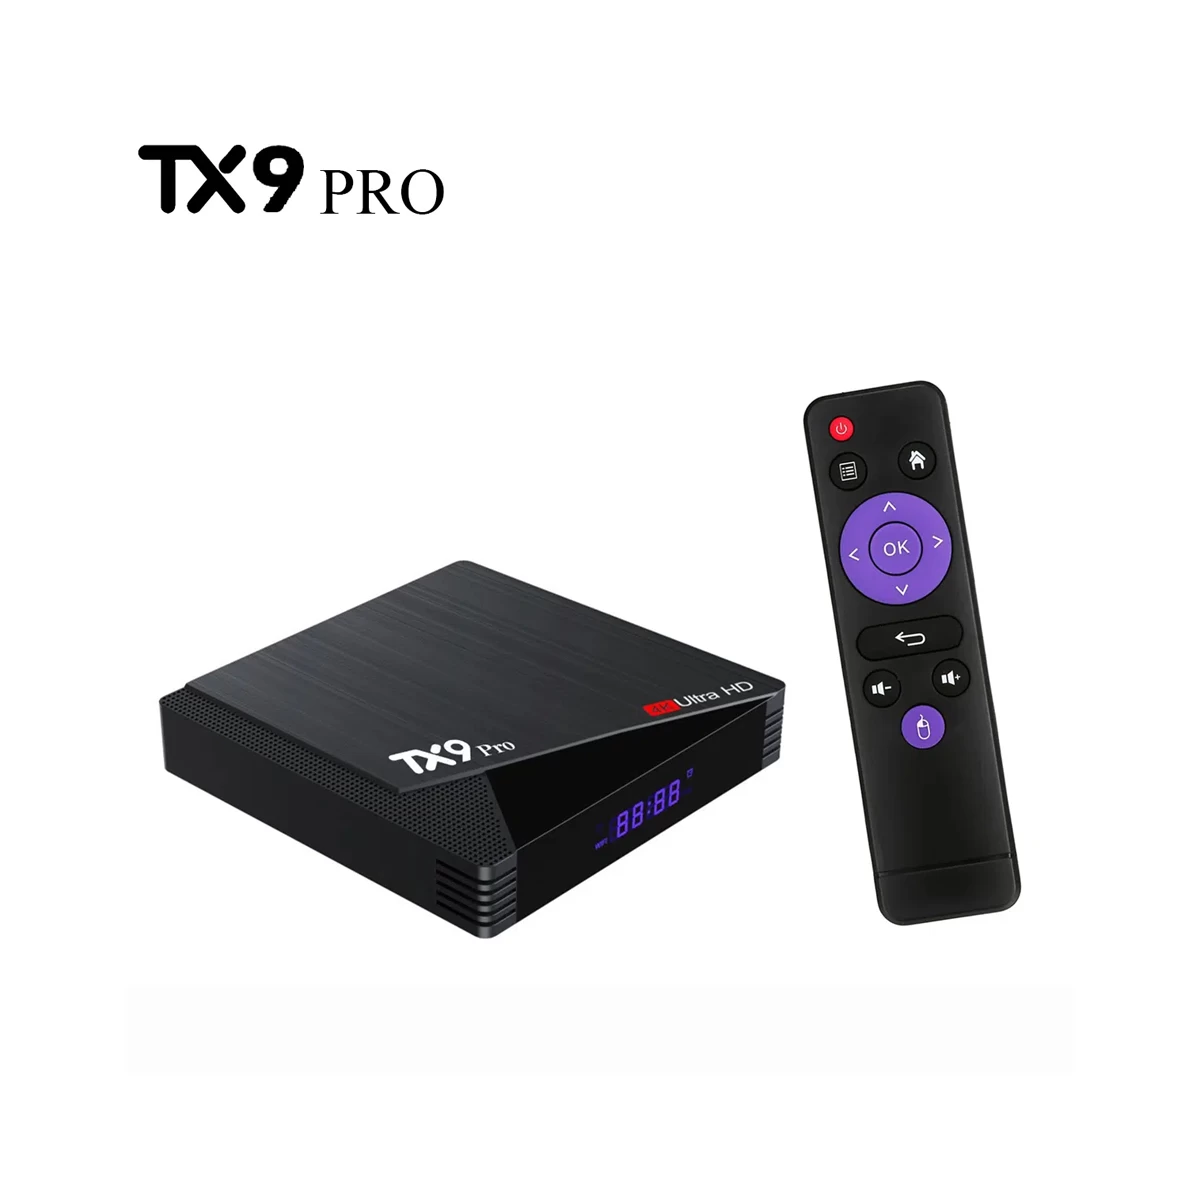 Android TV Box TX 9 Pro